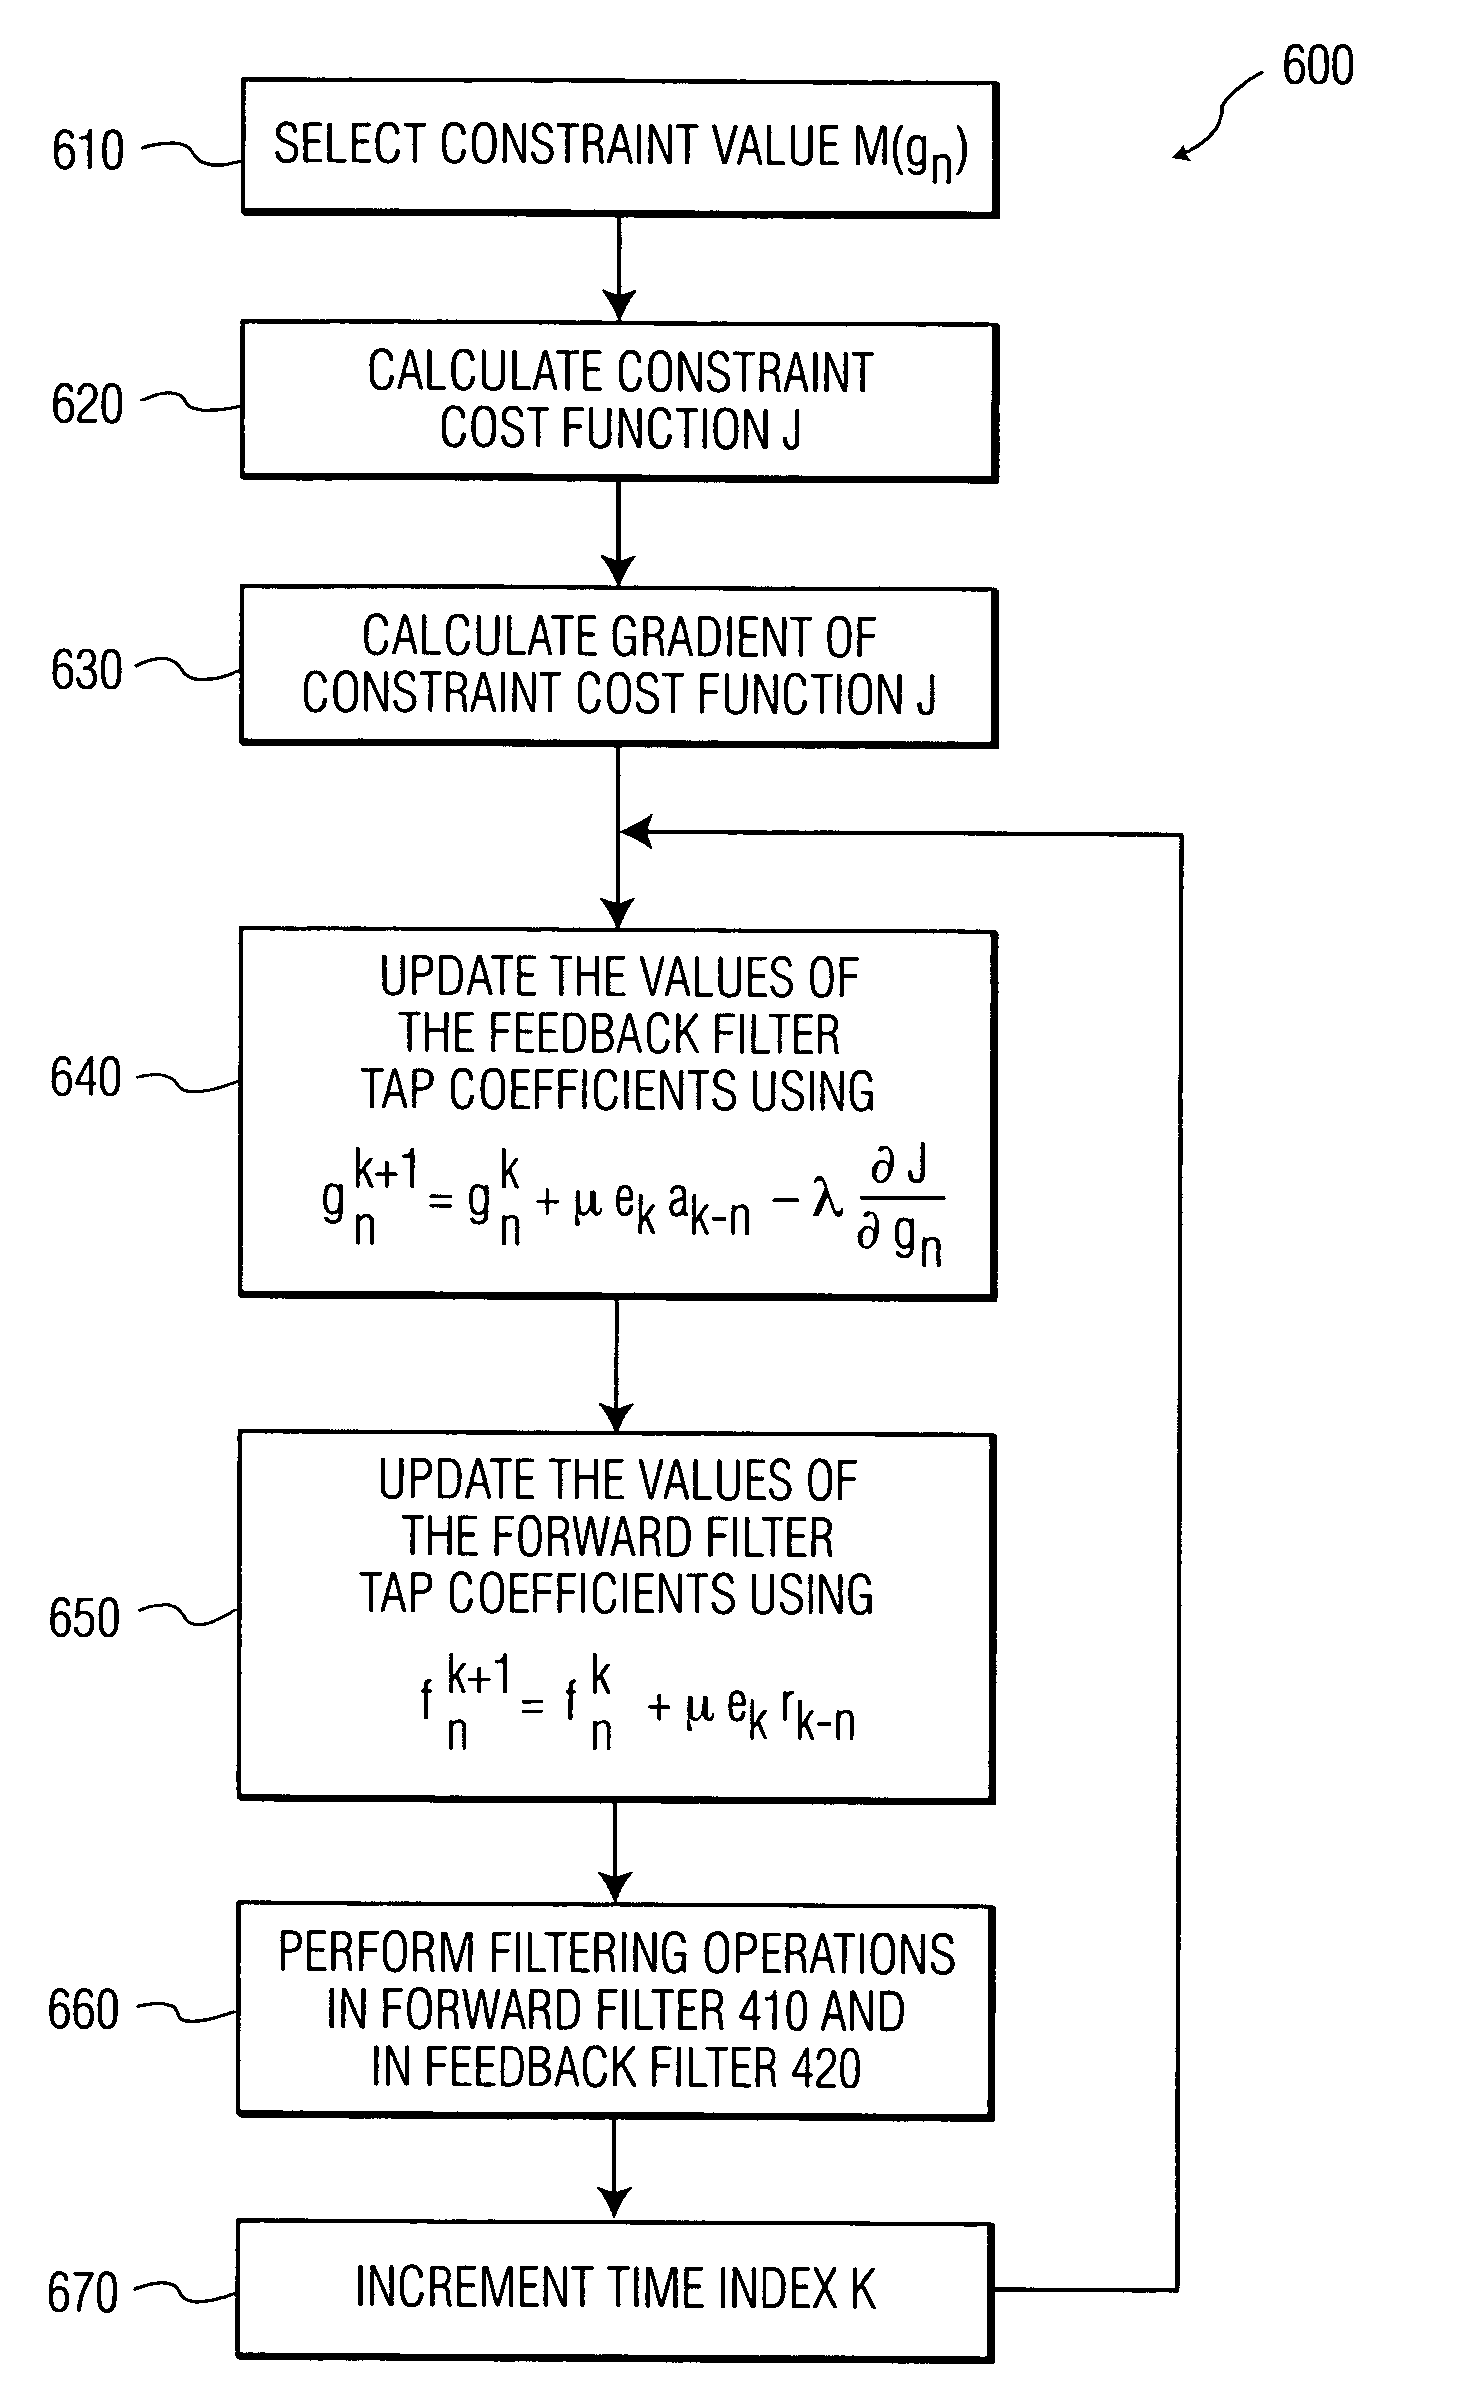 Apparatus and method for constraining the value of feedback filter tap coefficients in a decision feedback equalizer